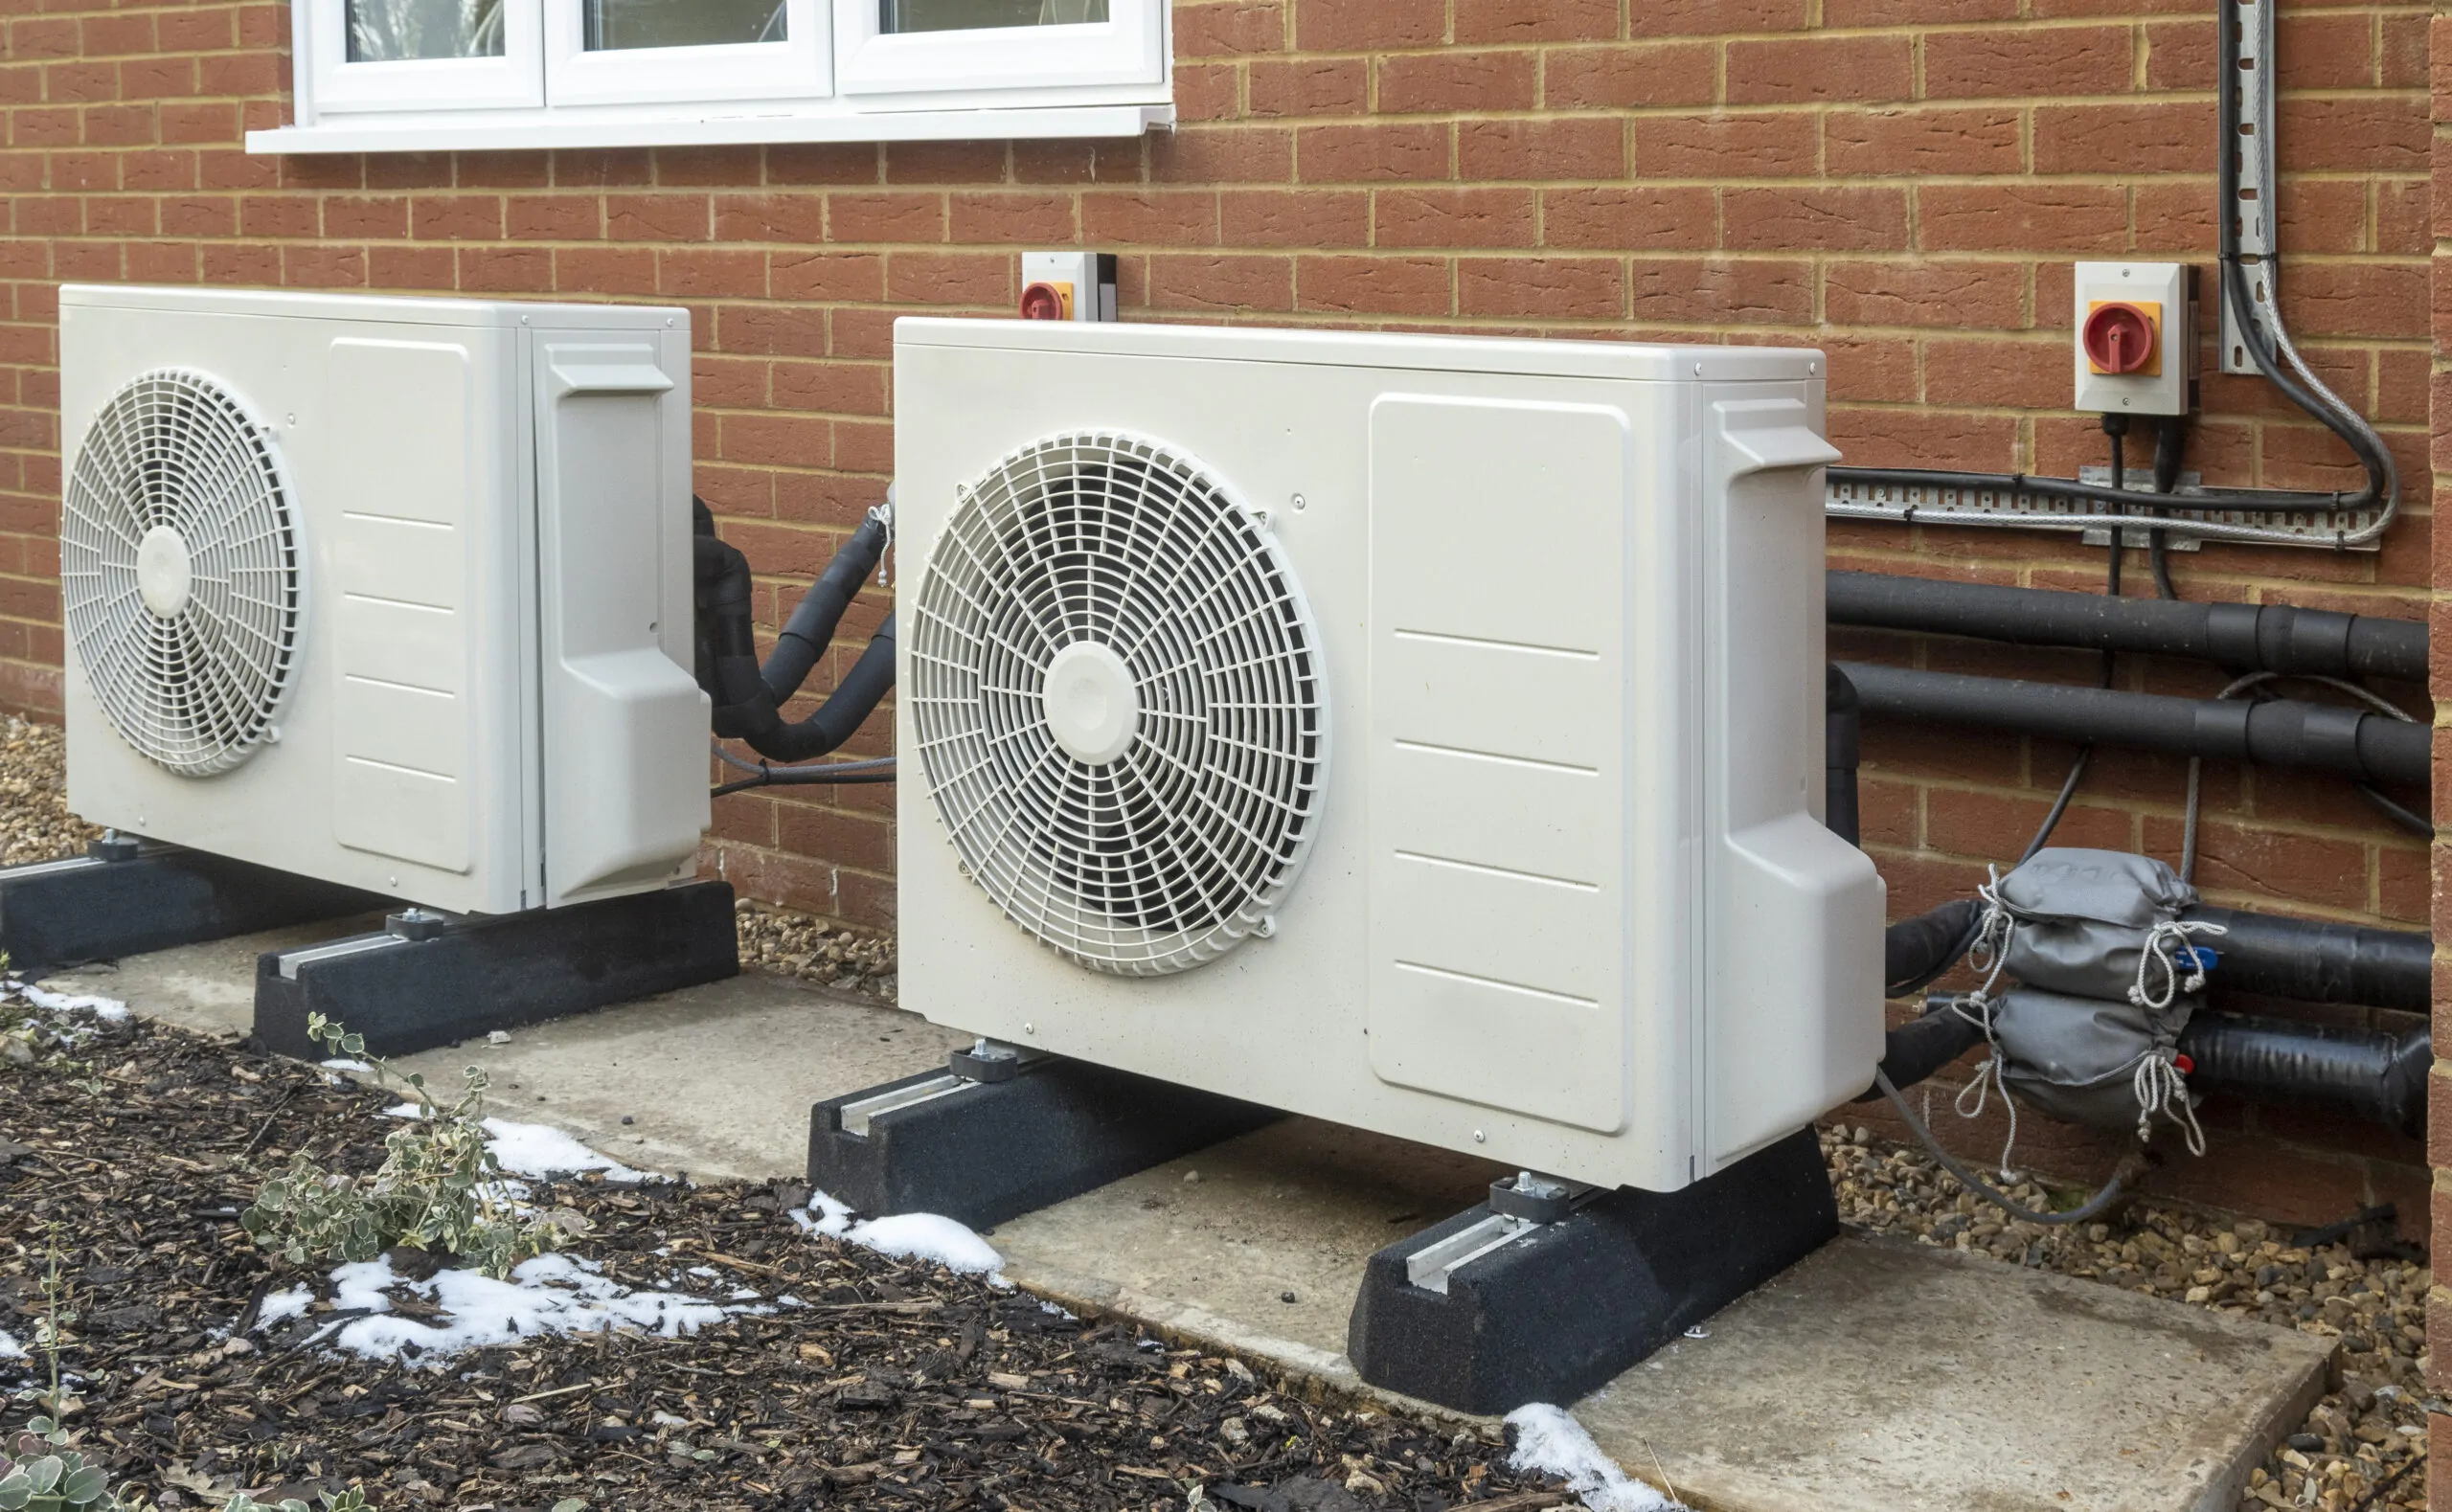 5 myths about Air Source Heat Pumps, busted - thumbnail image